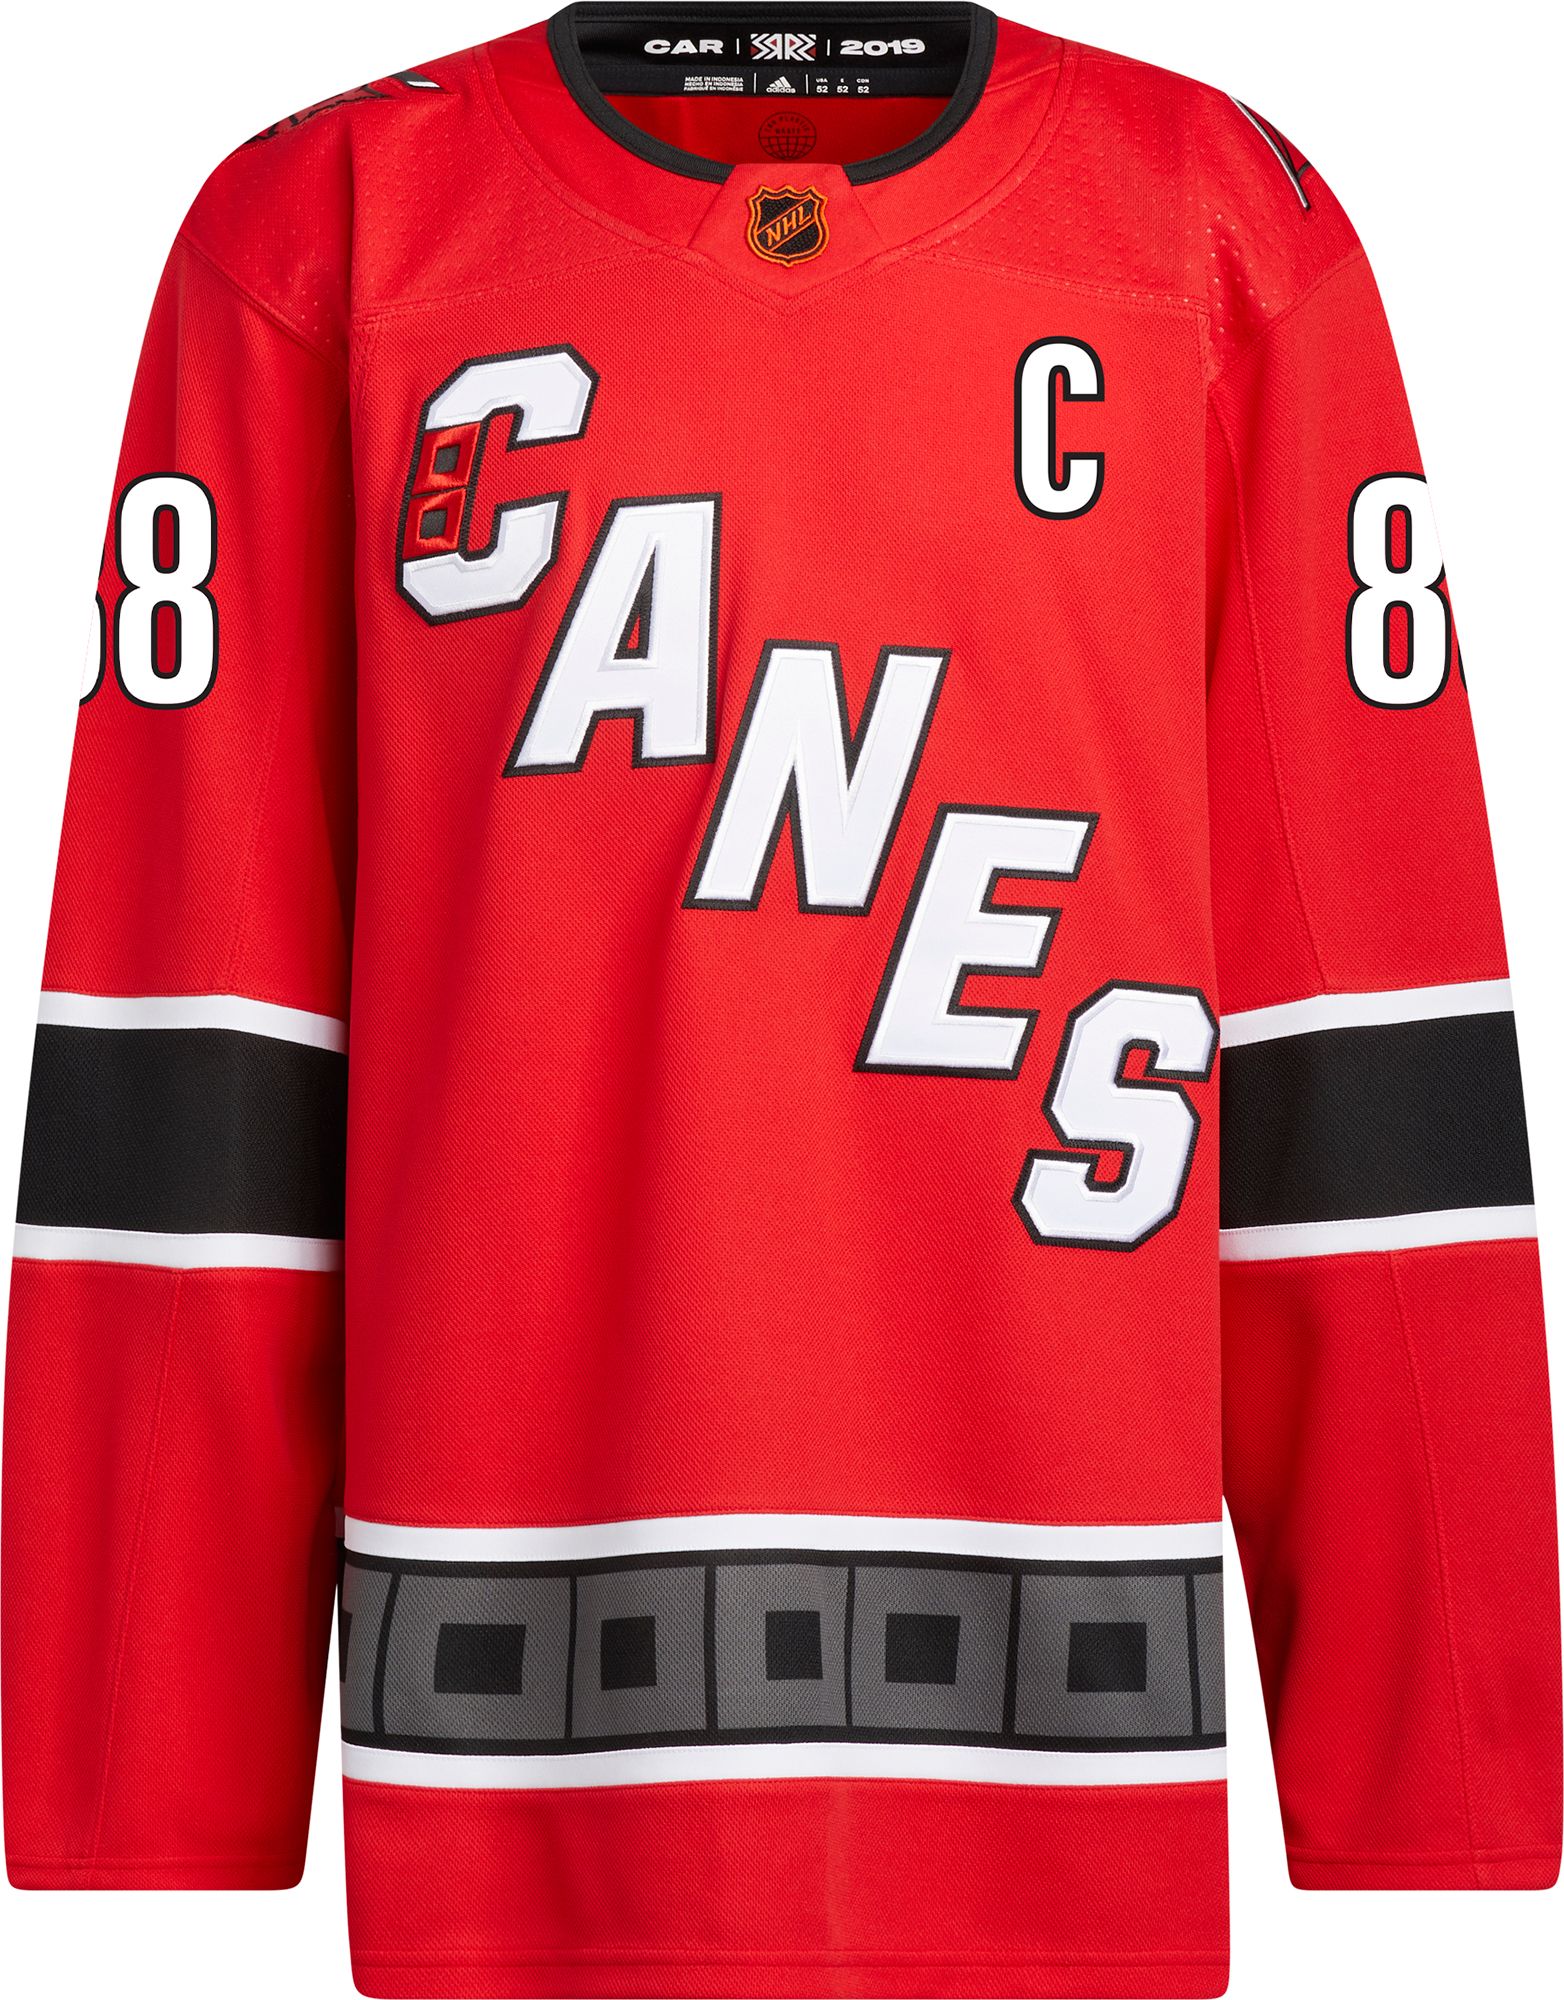 Hurricanes red C jersey